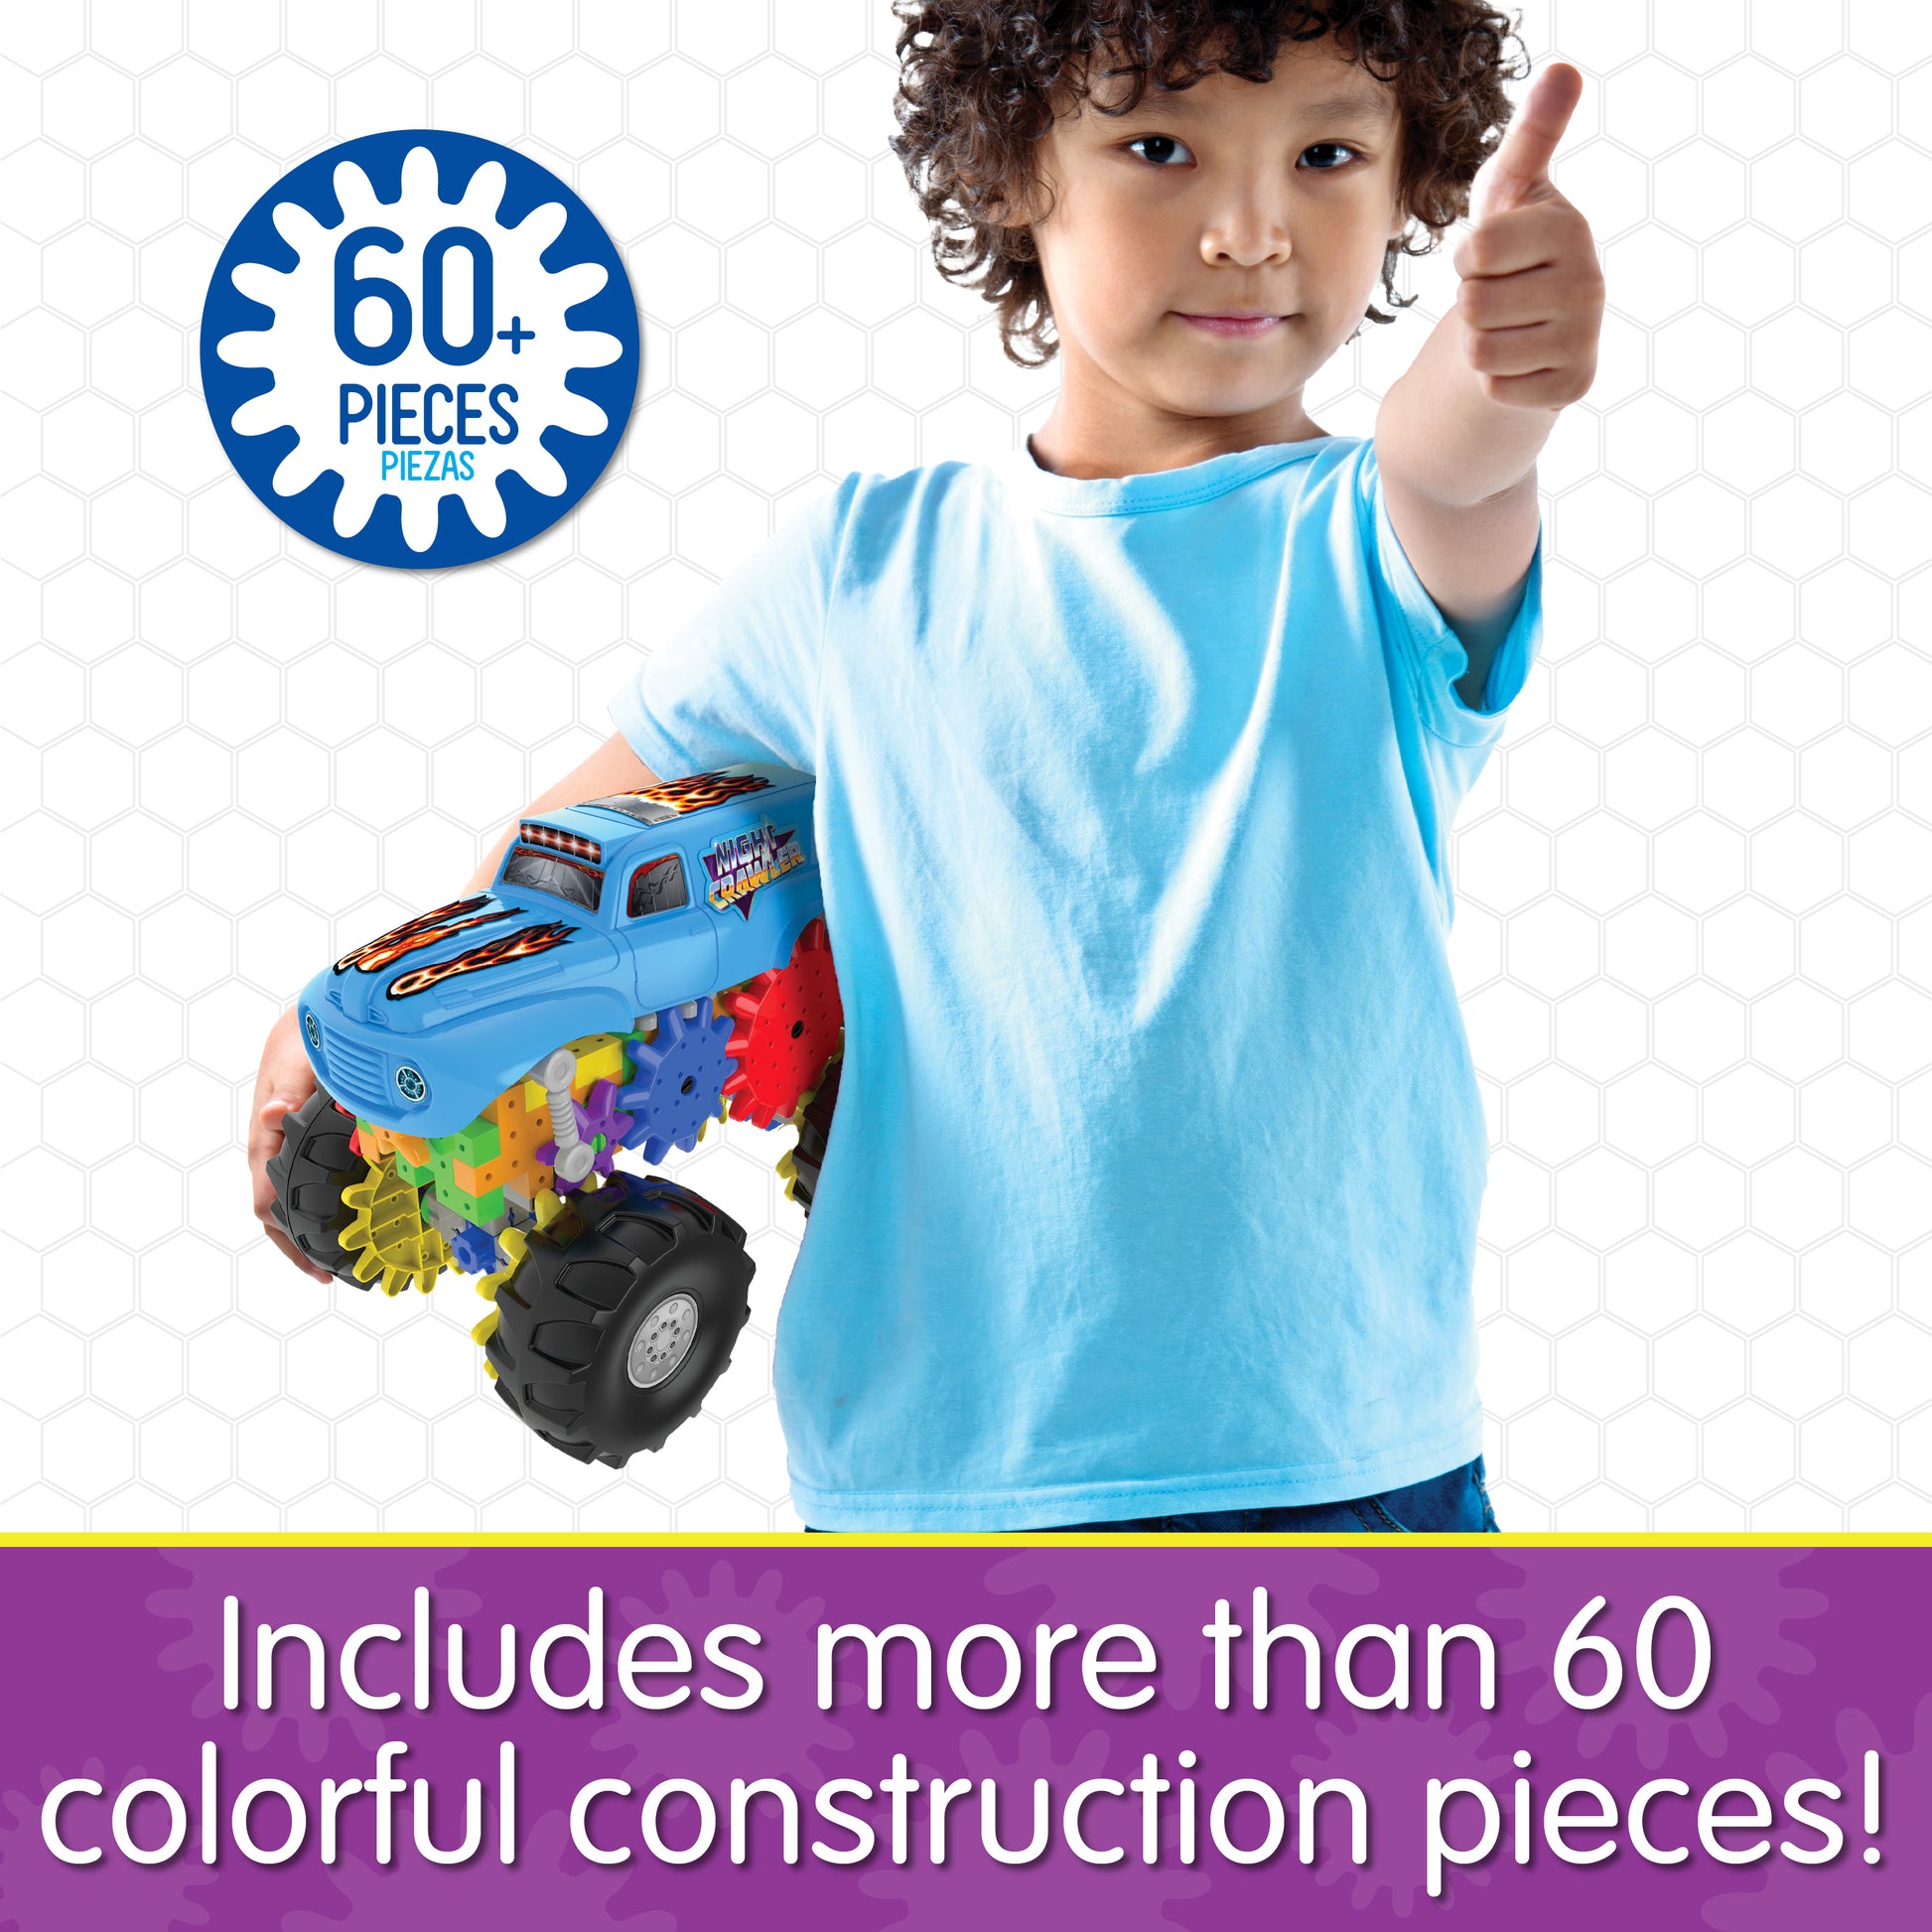 Infographic about Night Crawler that says, "Includes more than 60 colorful construction pieces!"